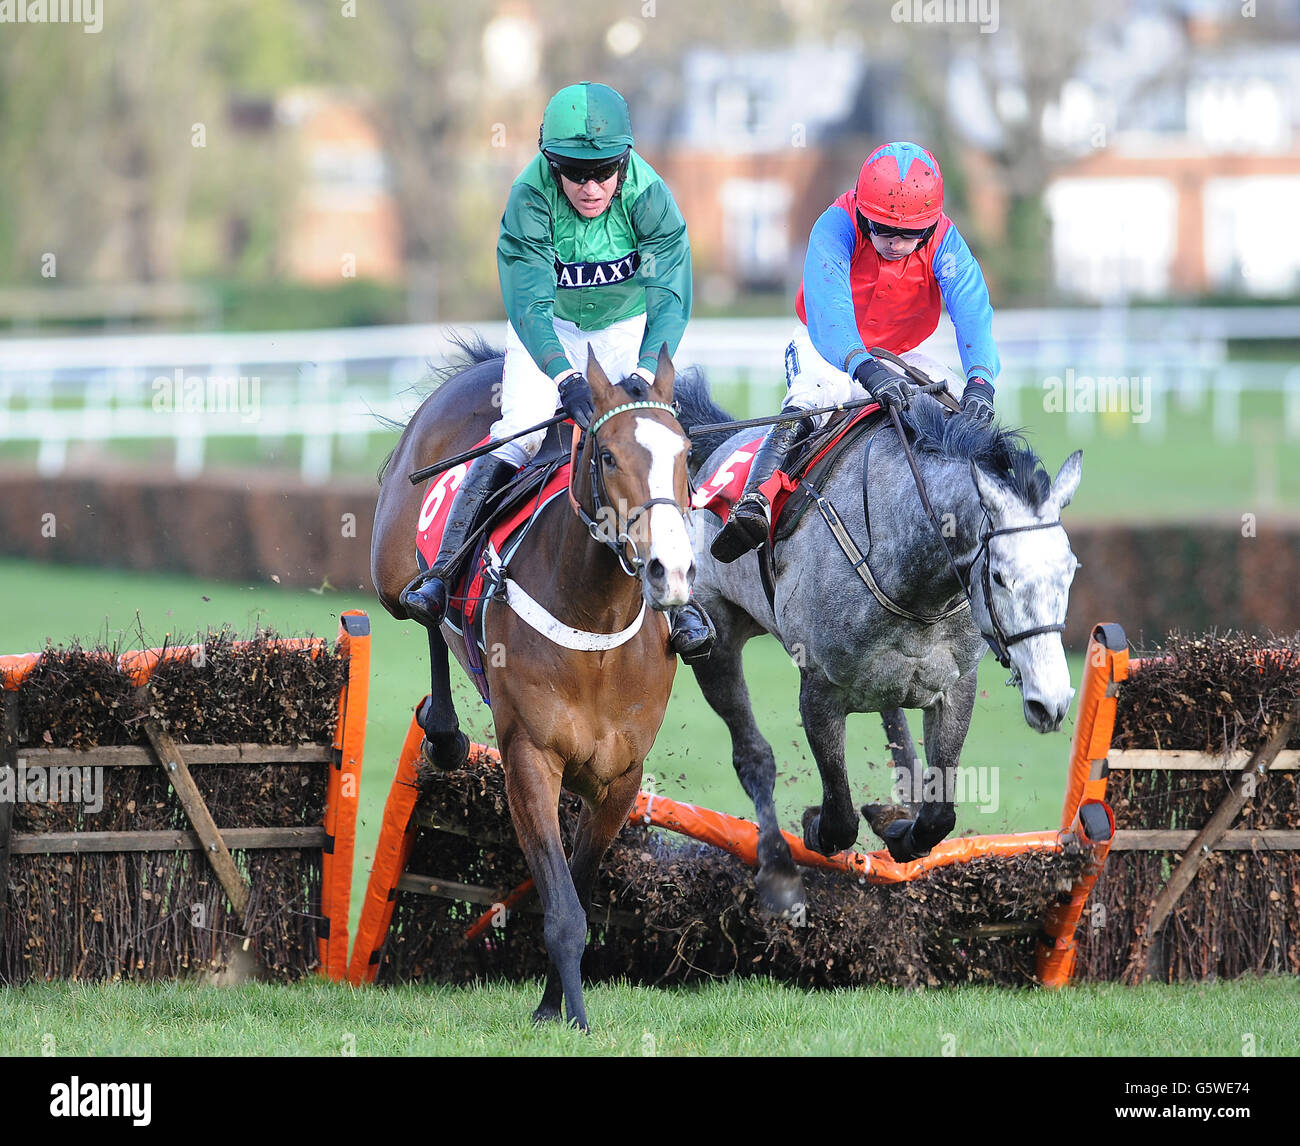 Utopie Des Bordes ridden by Barry Geraghty clears the last fence as Twigline ridden by Rubt Walsh falls in the Jane Seymour Mares' Novices' Hurdle Race(Listed) on Royal Artillery Gold Cup Day at Sandown Park Racecourse Stock Photo